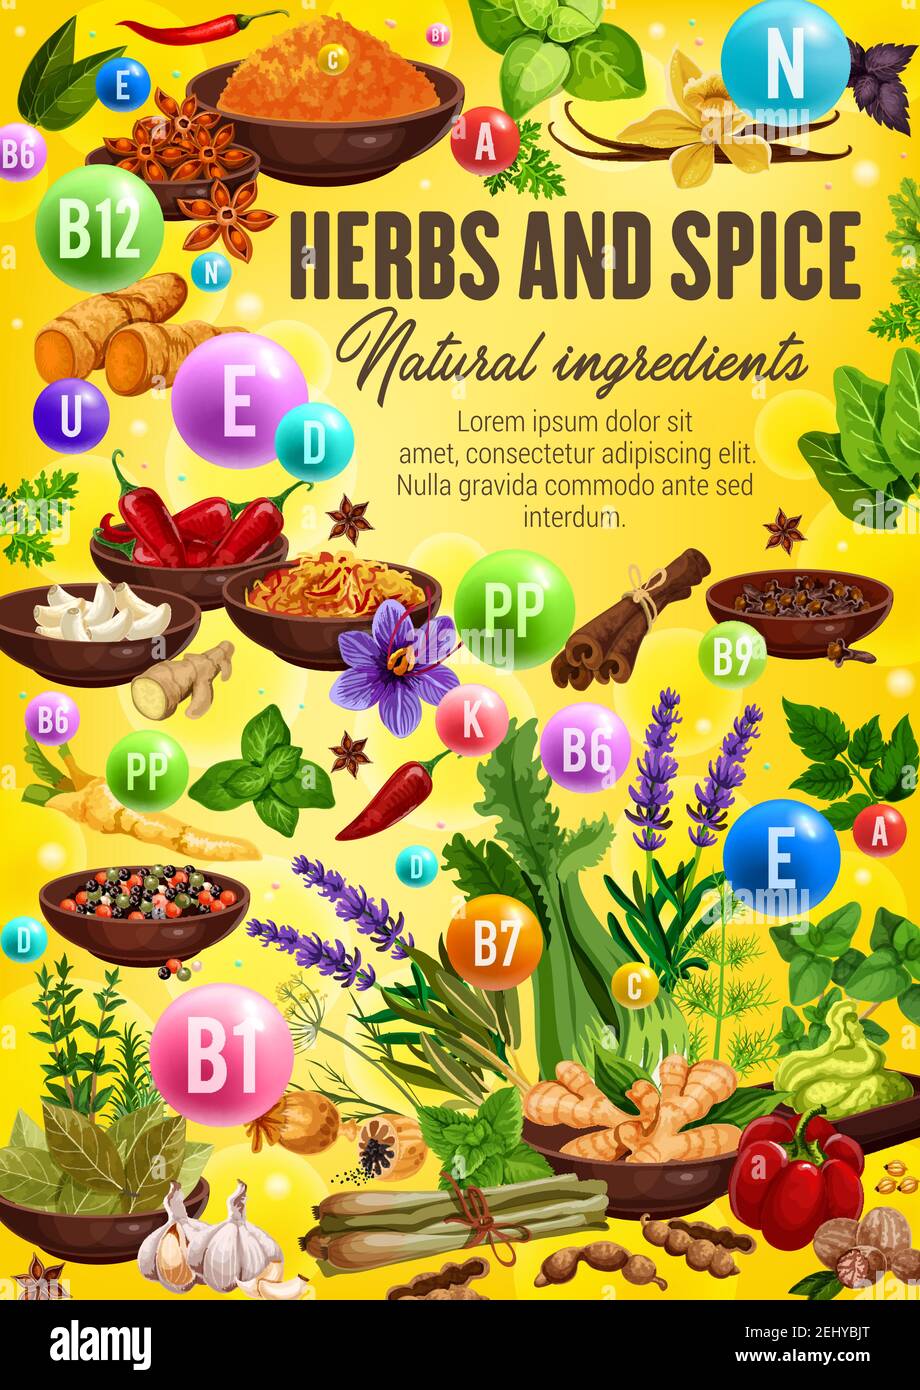 https://c8.alamy.com/comp/2EHYBJT/vitamins-and-minerals-in-spices-and-herbs-vector-chili-pepper-ginger-and-garlic-vanilla-basil-and-cinnamon-star-anise-dill-and-turmeric-saffron-2EHYBJT.jpg